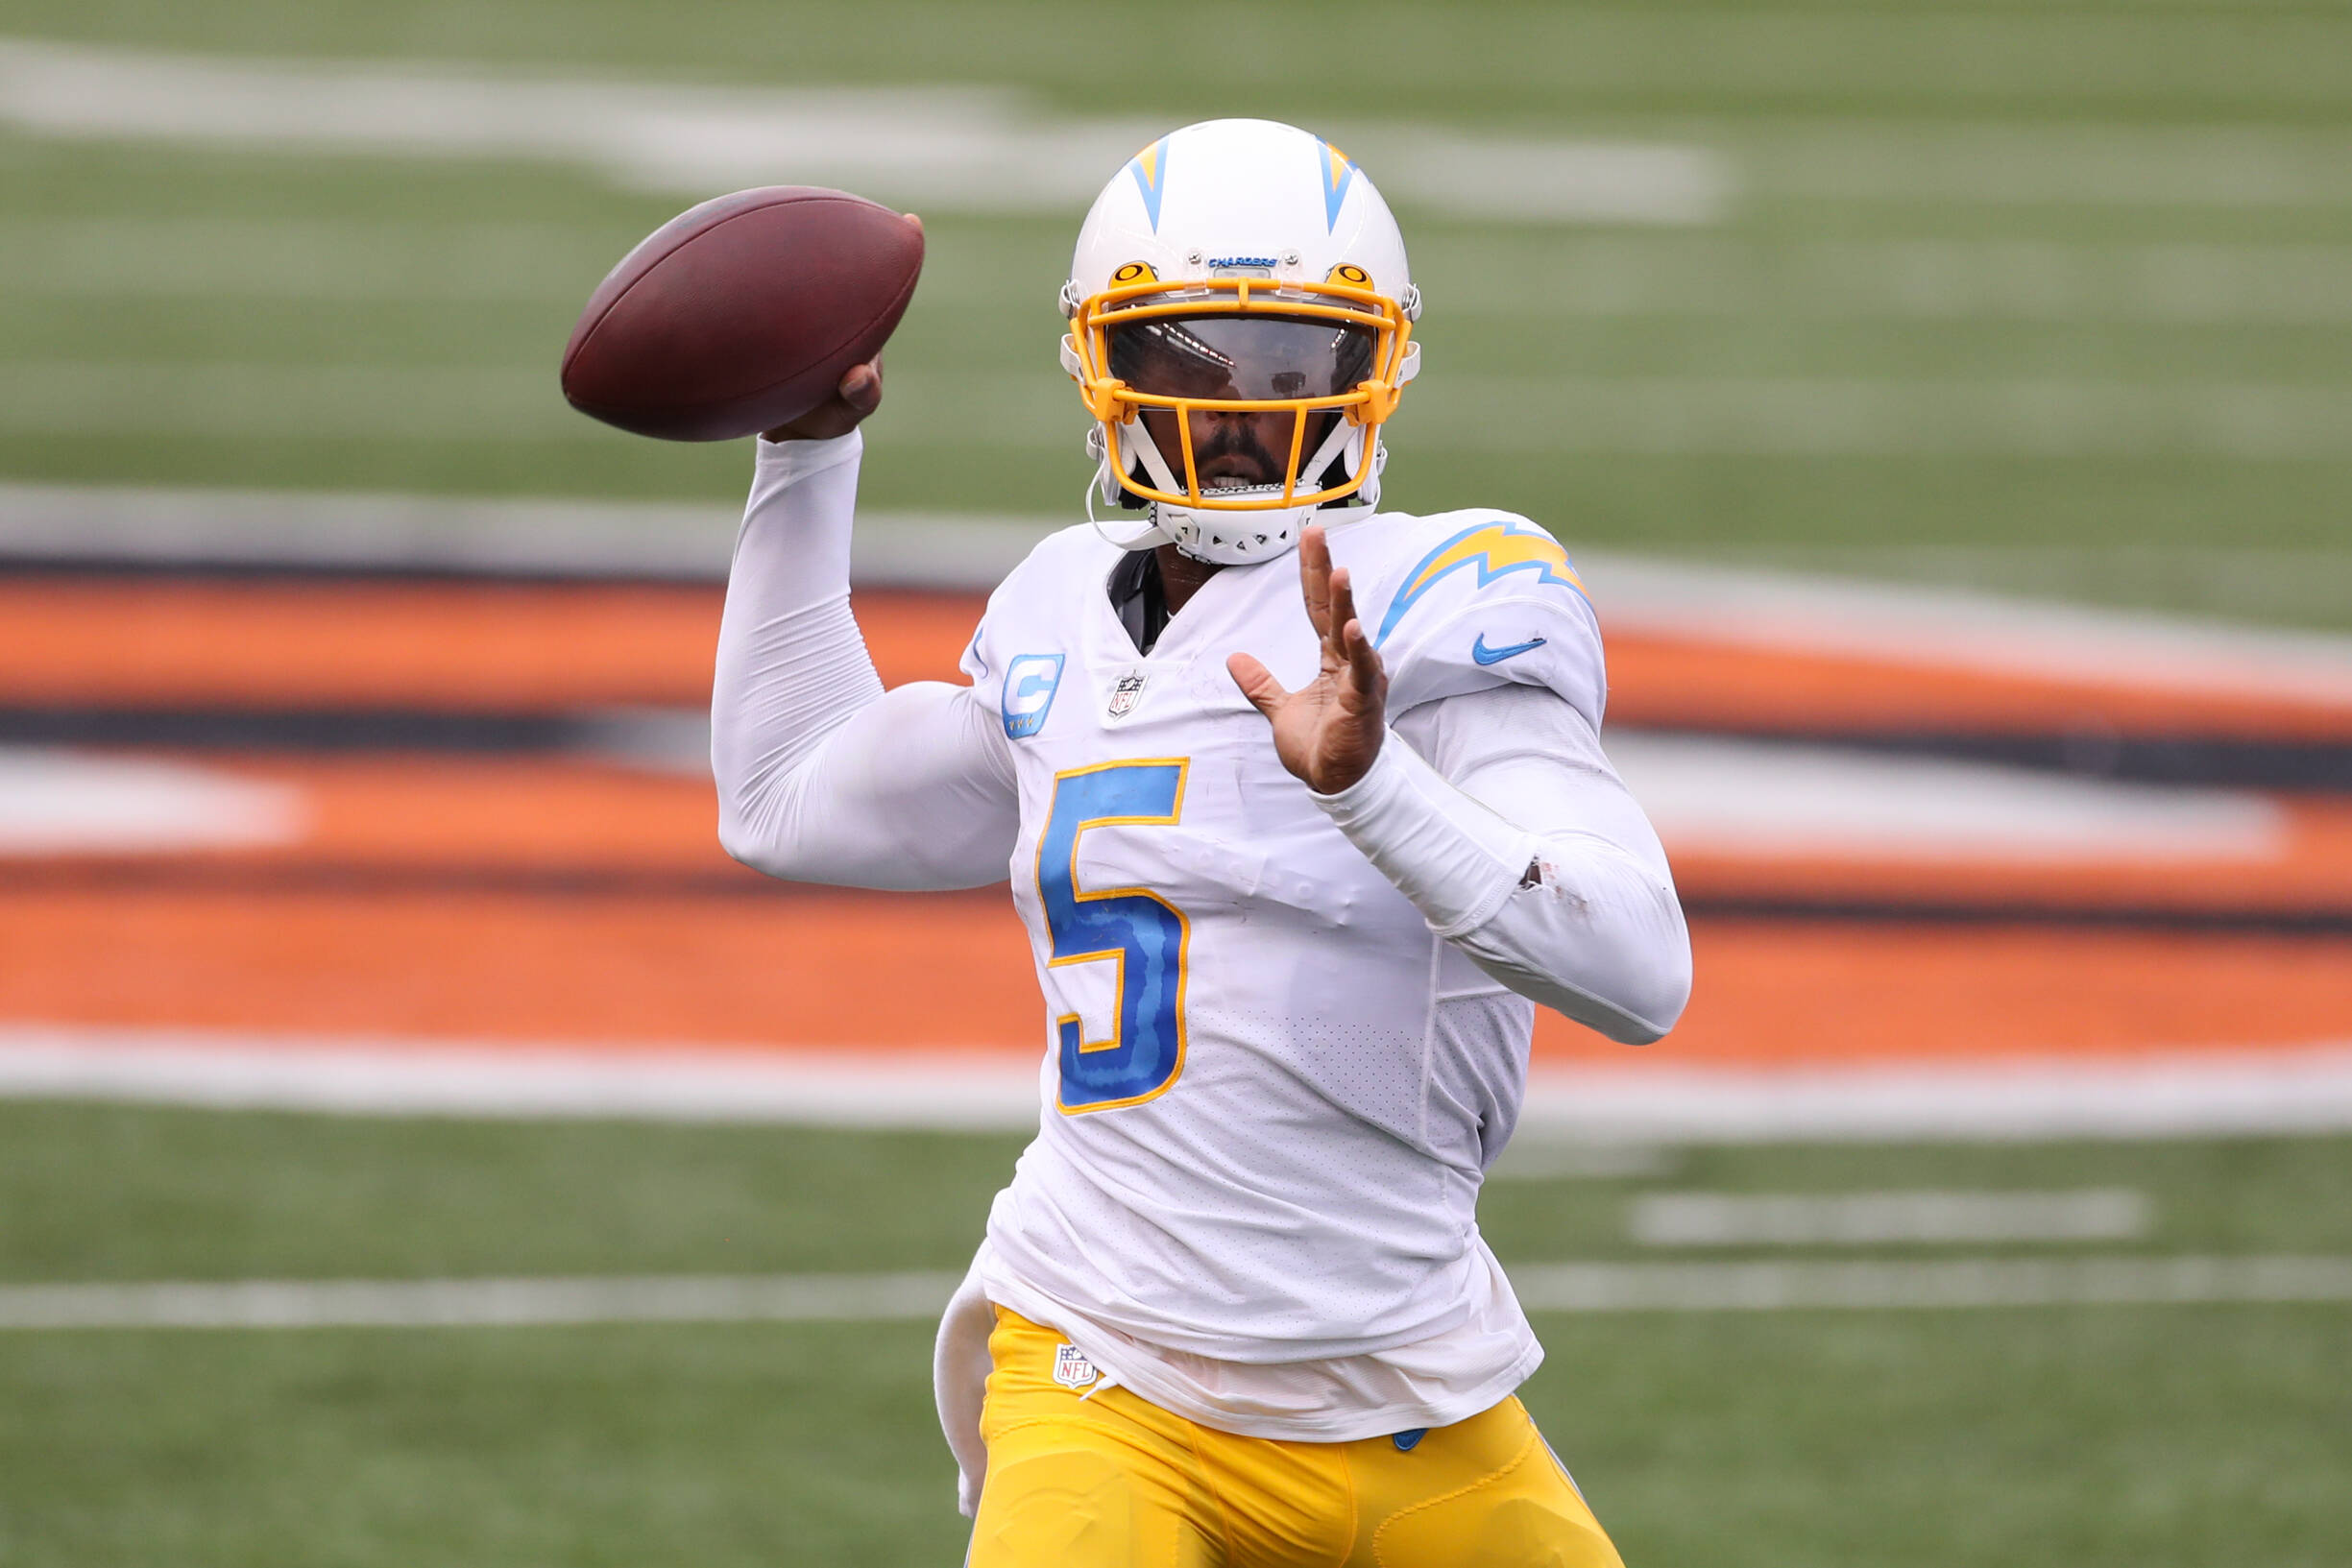 CINCINNATI, OH - SEPTEMBER 13: Los Angeles Chargers quarterback Tyrod Taylor (5) passes the ball during the game against